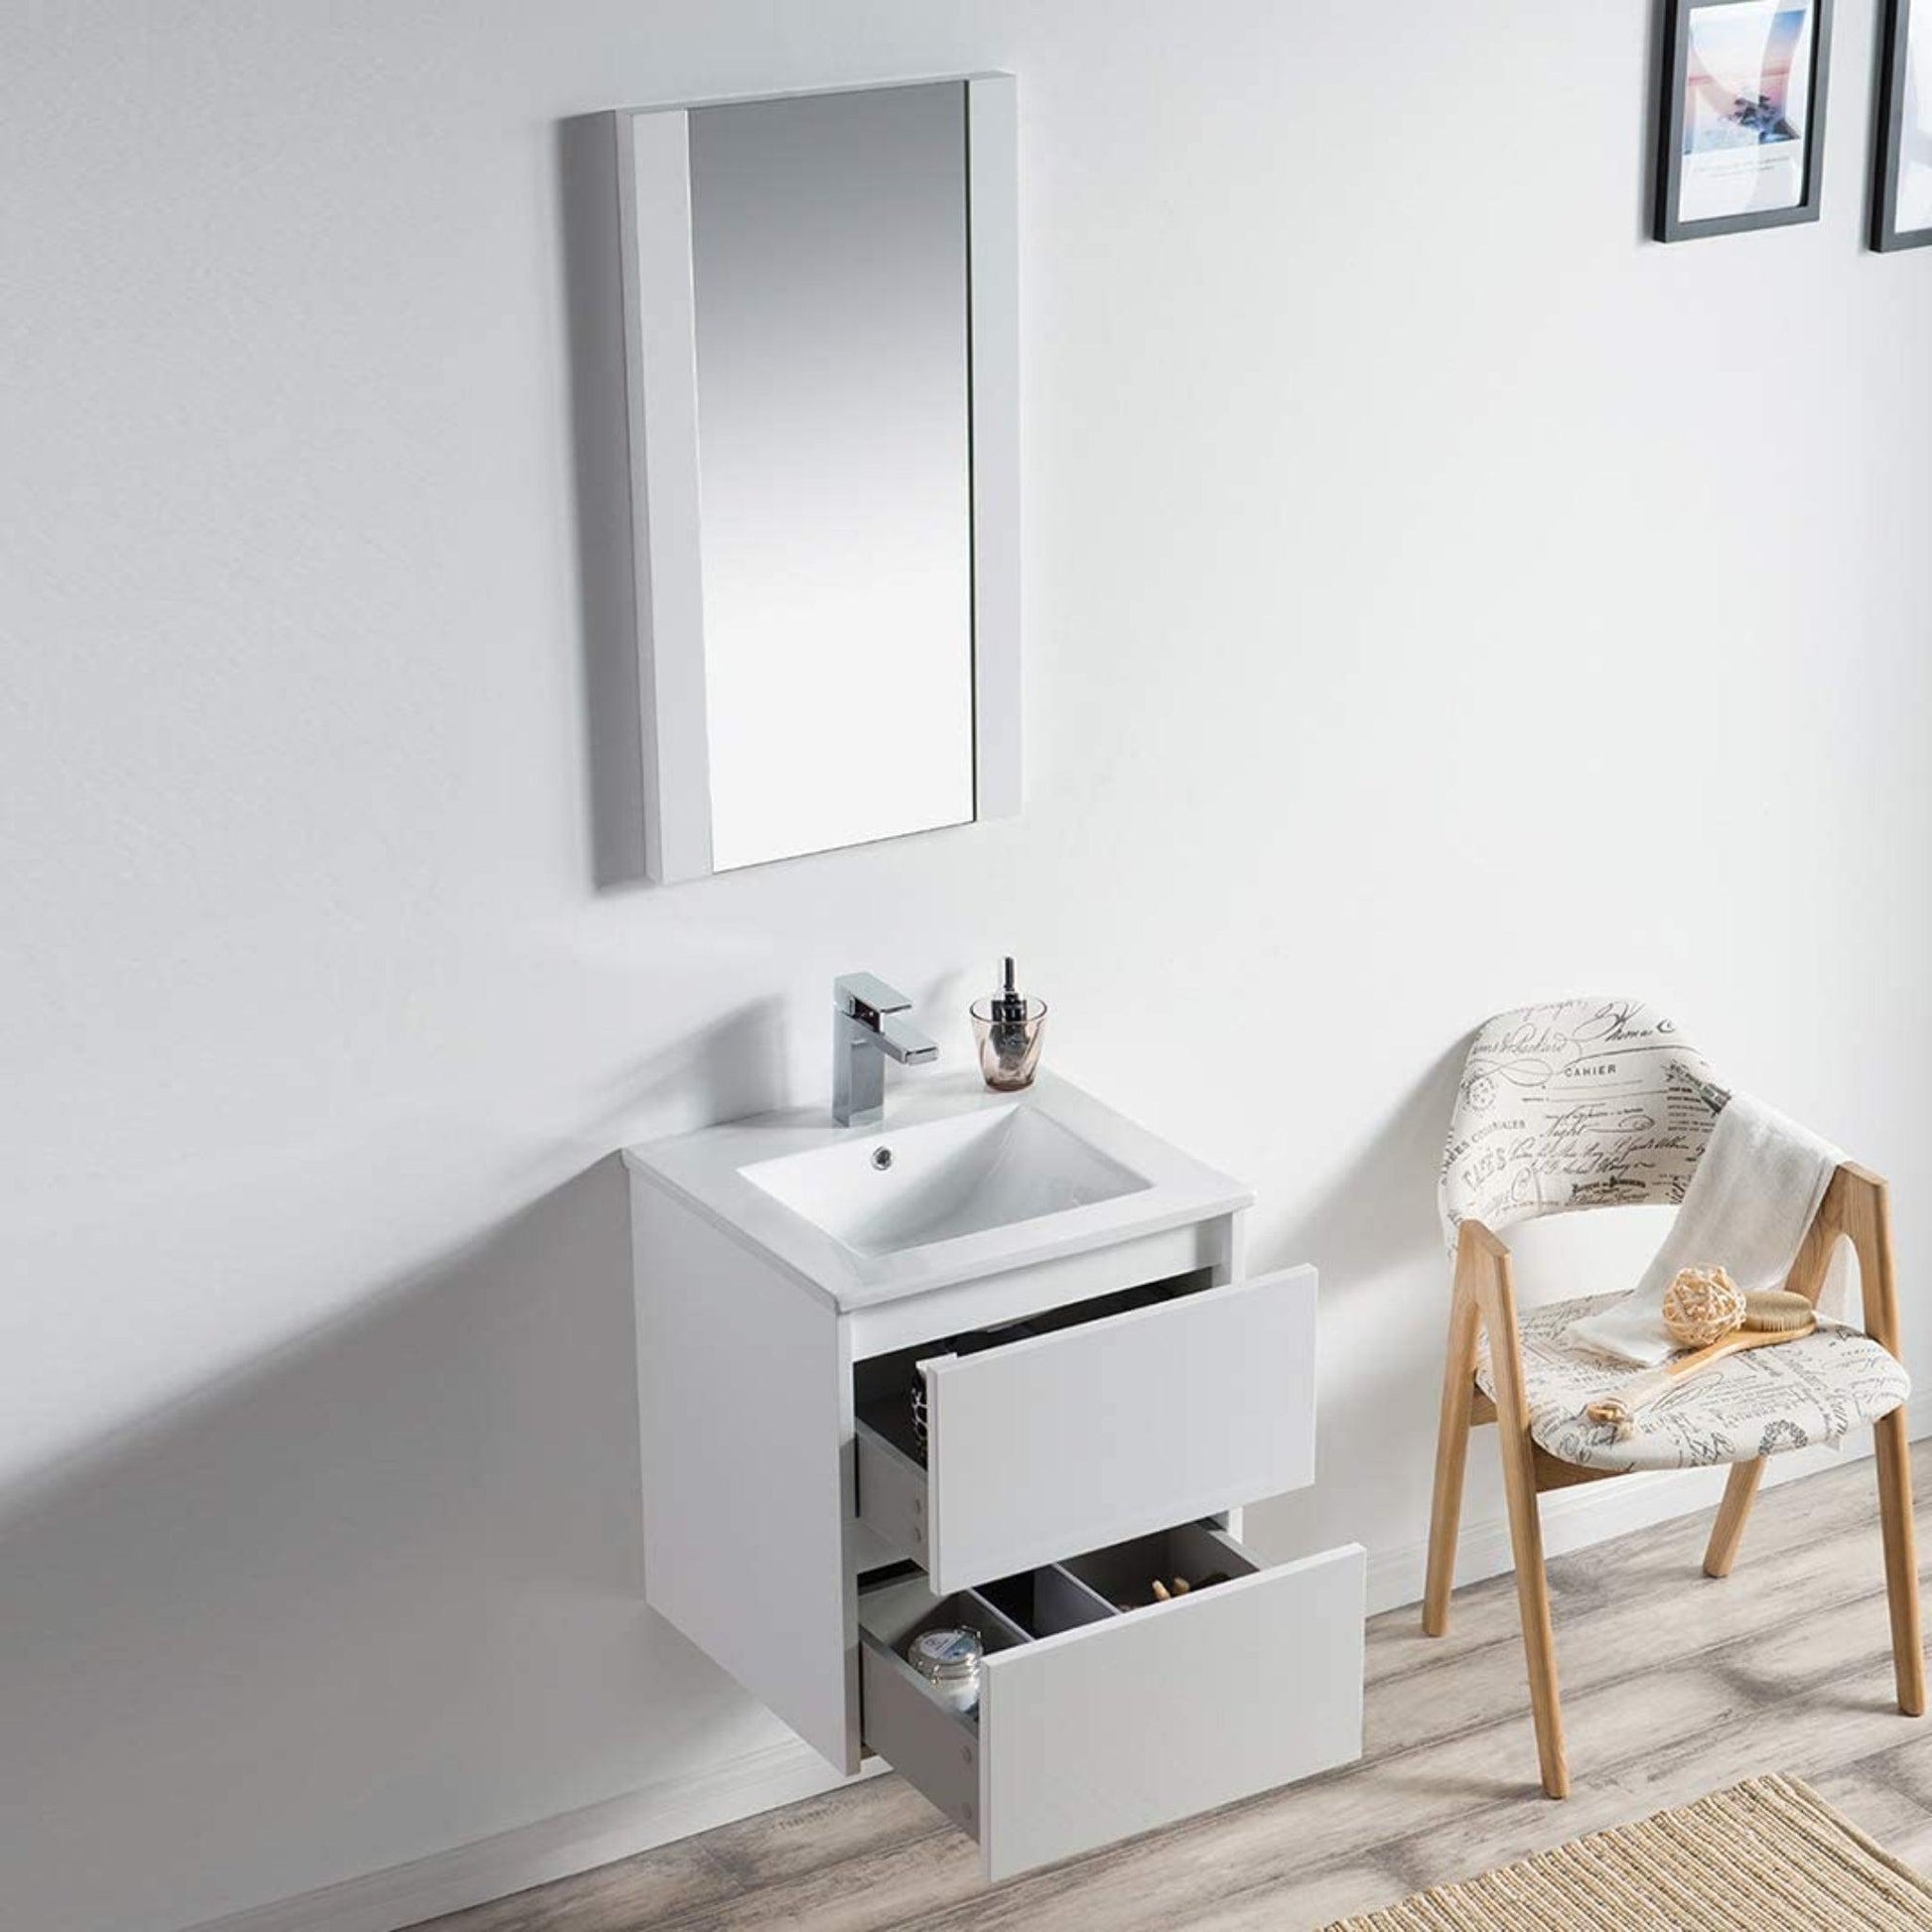 Blossom Valencia 20" 2-Drawer White Wall-Mounted Vanity Set With Ceramic Top and Integrated Single Sink